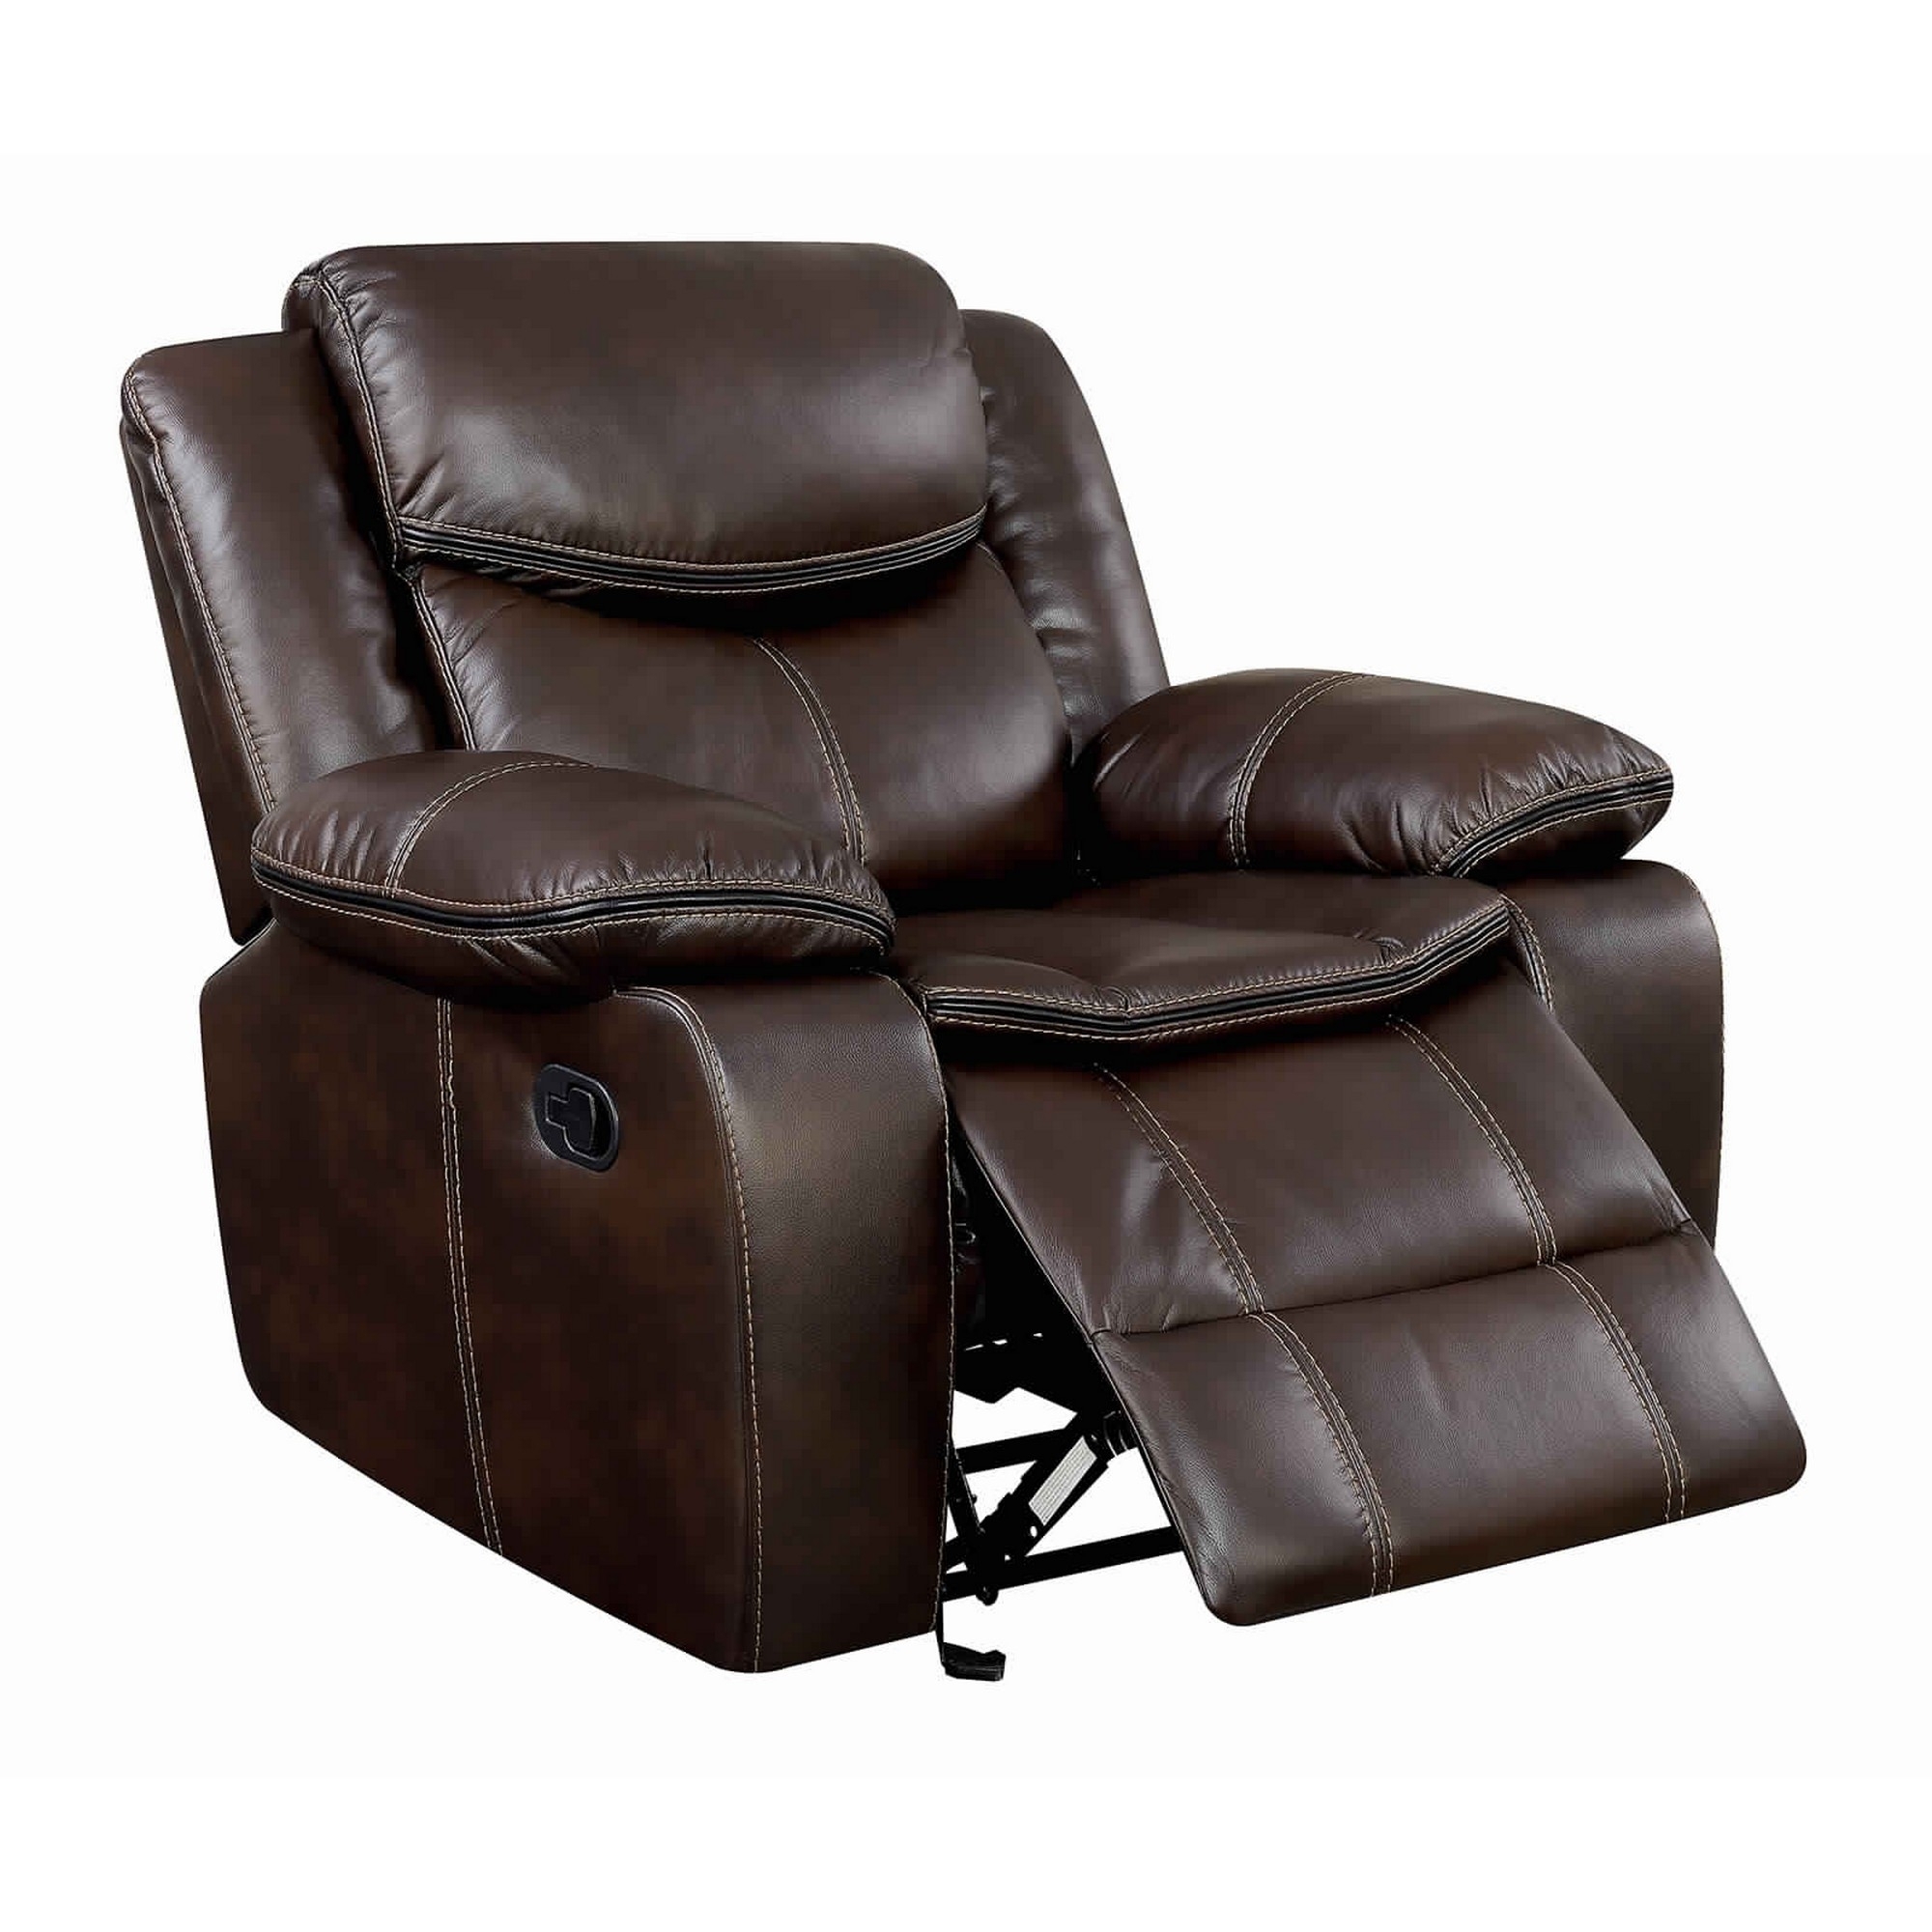 Leatherette Glider Recliner Chair With Large Padded Arms In Brown - Saltoro Sherpi